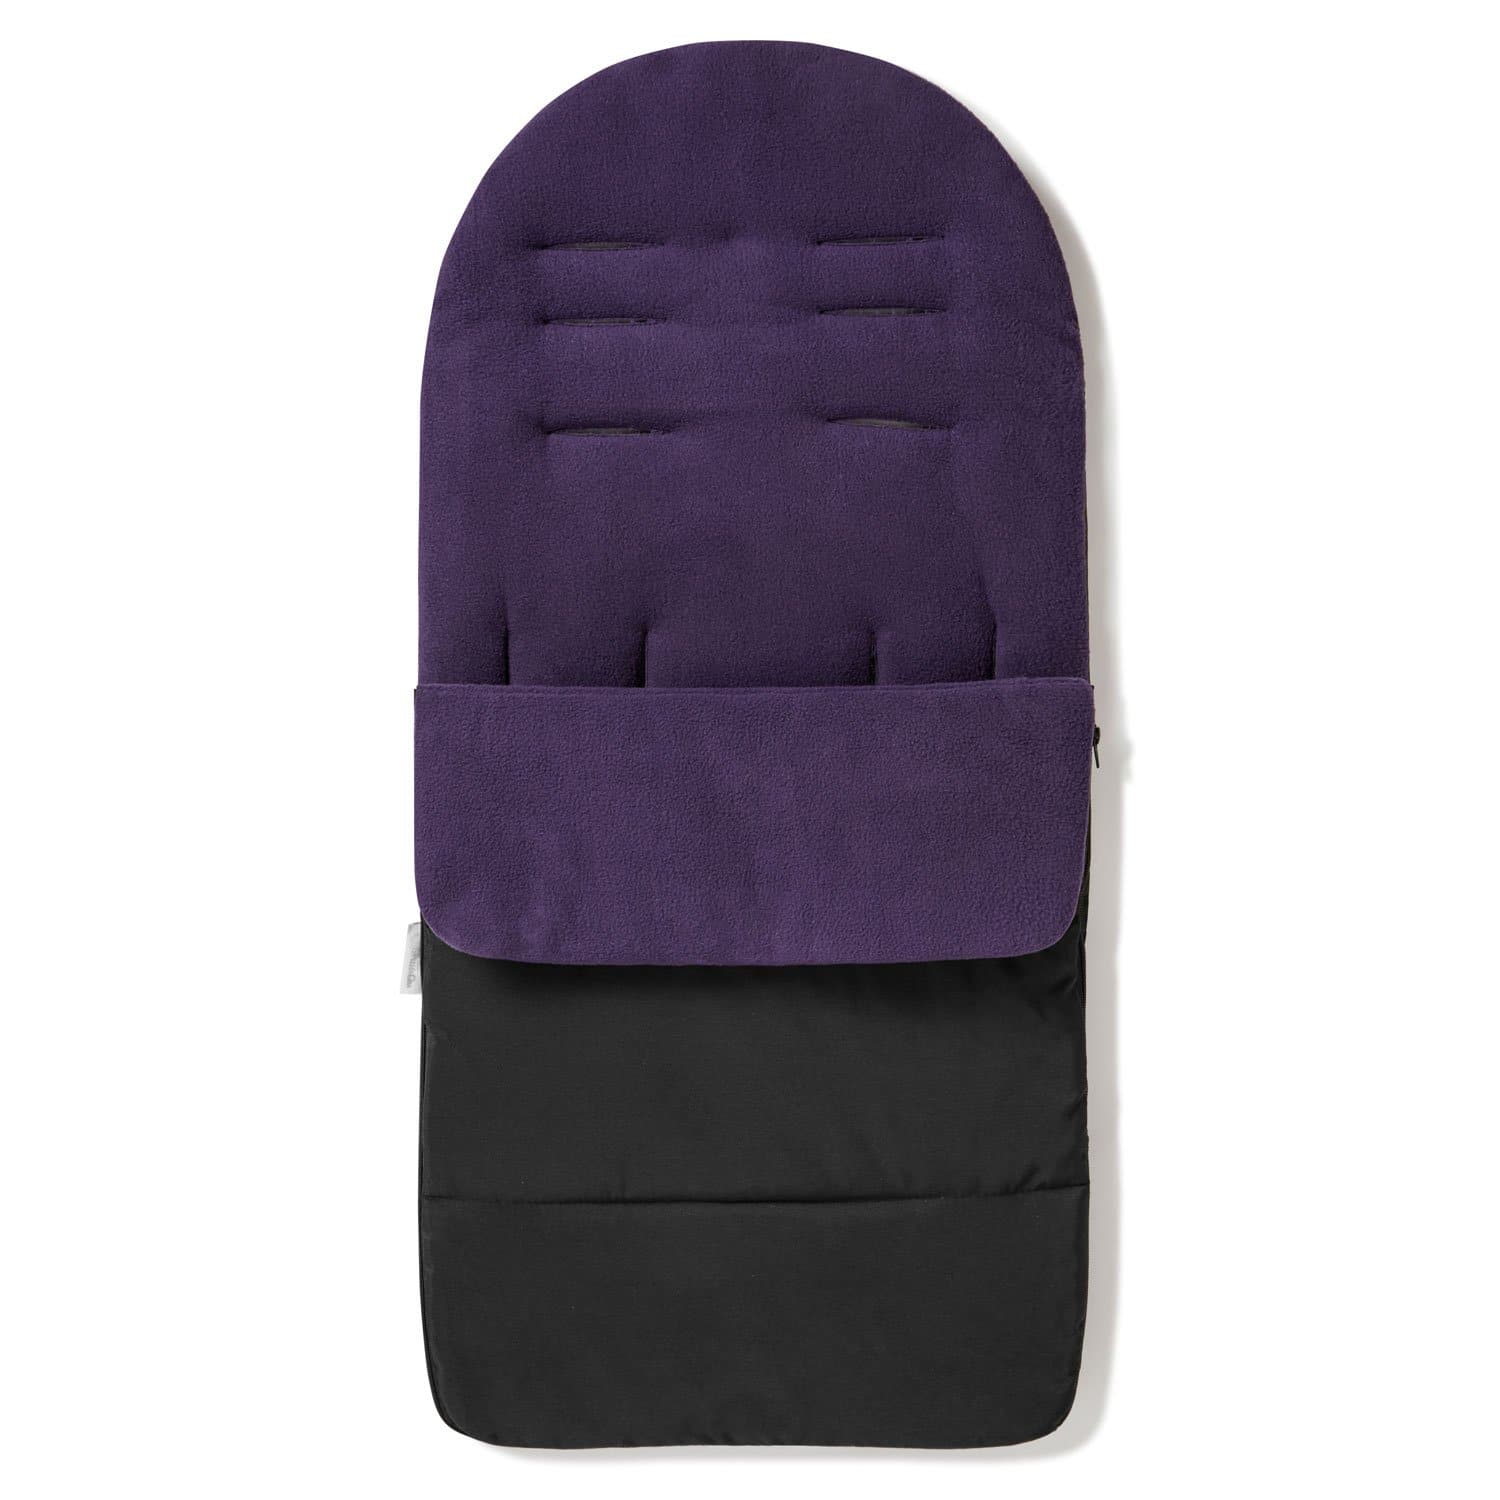 Premium Footmuff / Cosy Toes Compatible with Babylo - Plum Purple / Fits All Models | For Your Little One